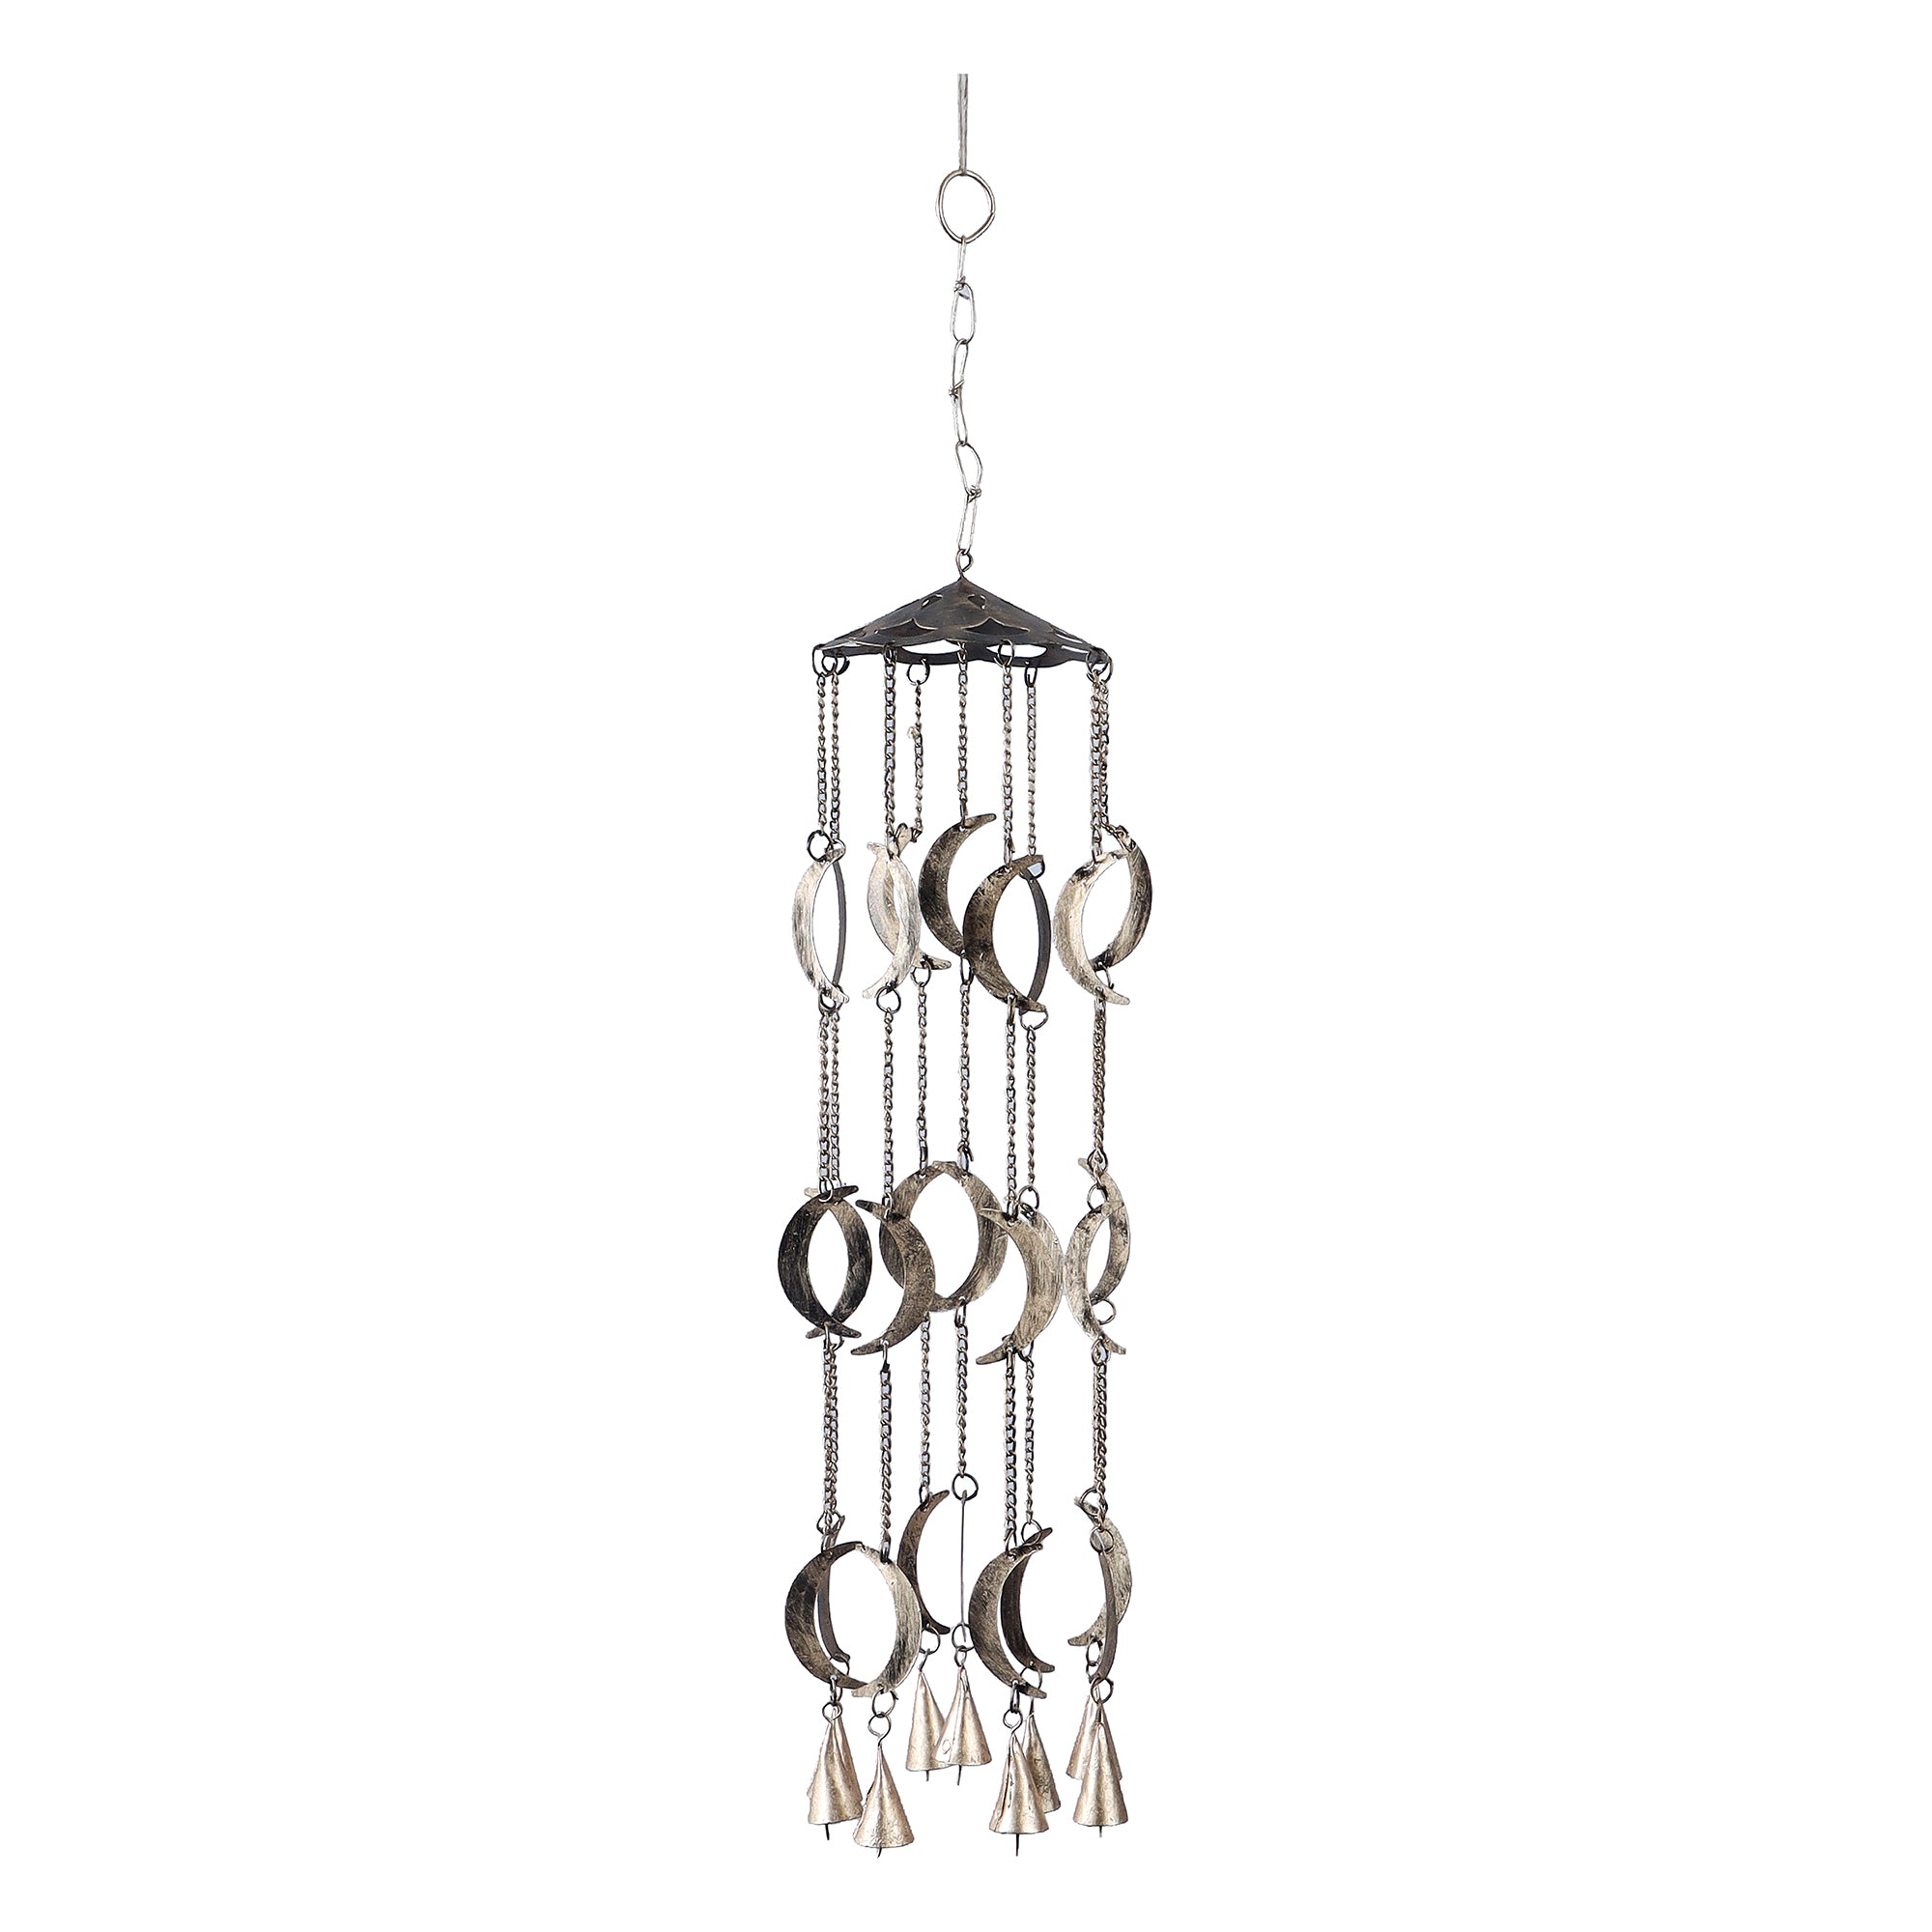 The Moon Chandelier Wind Chime